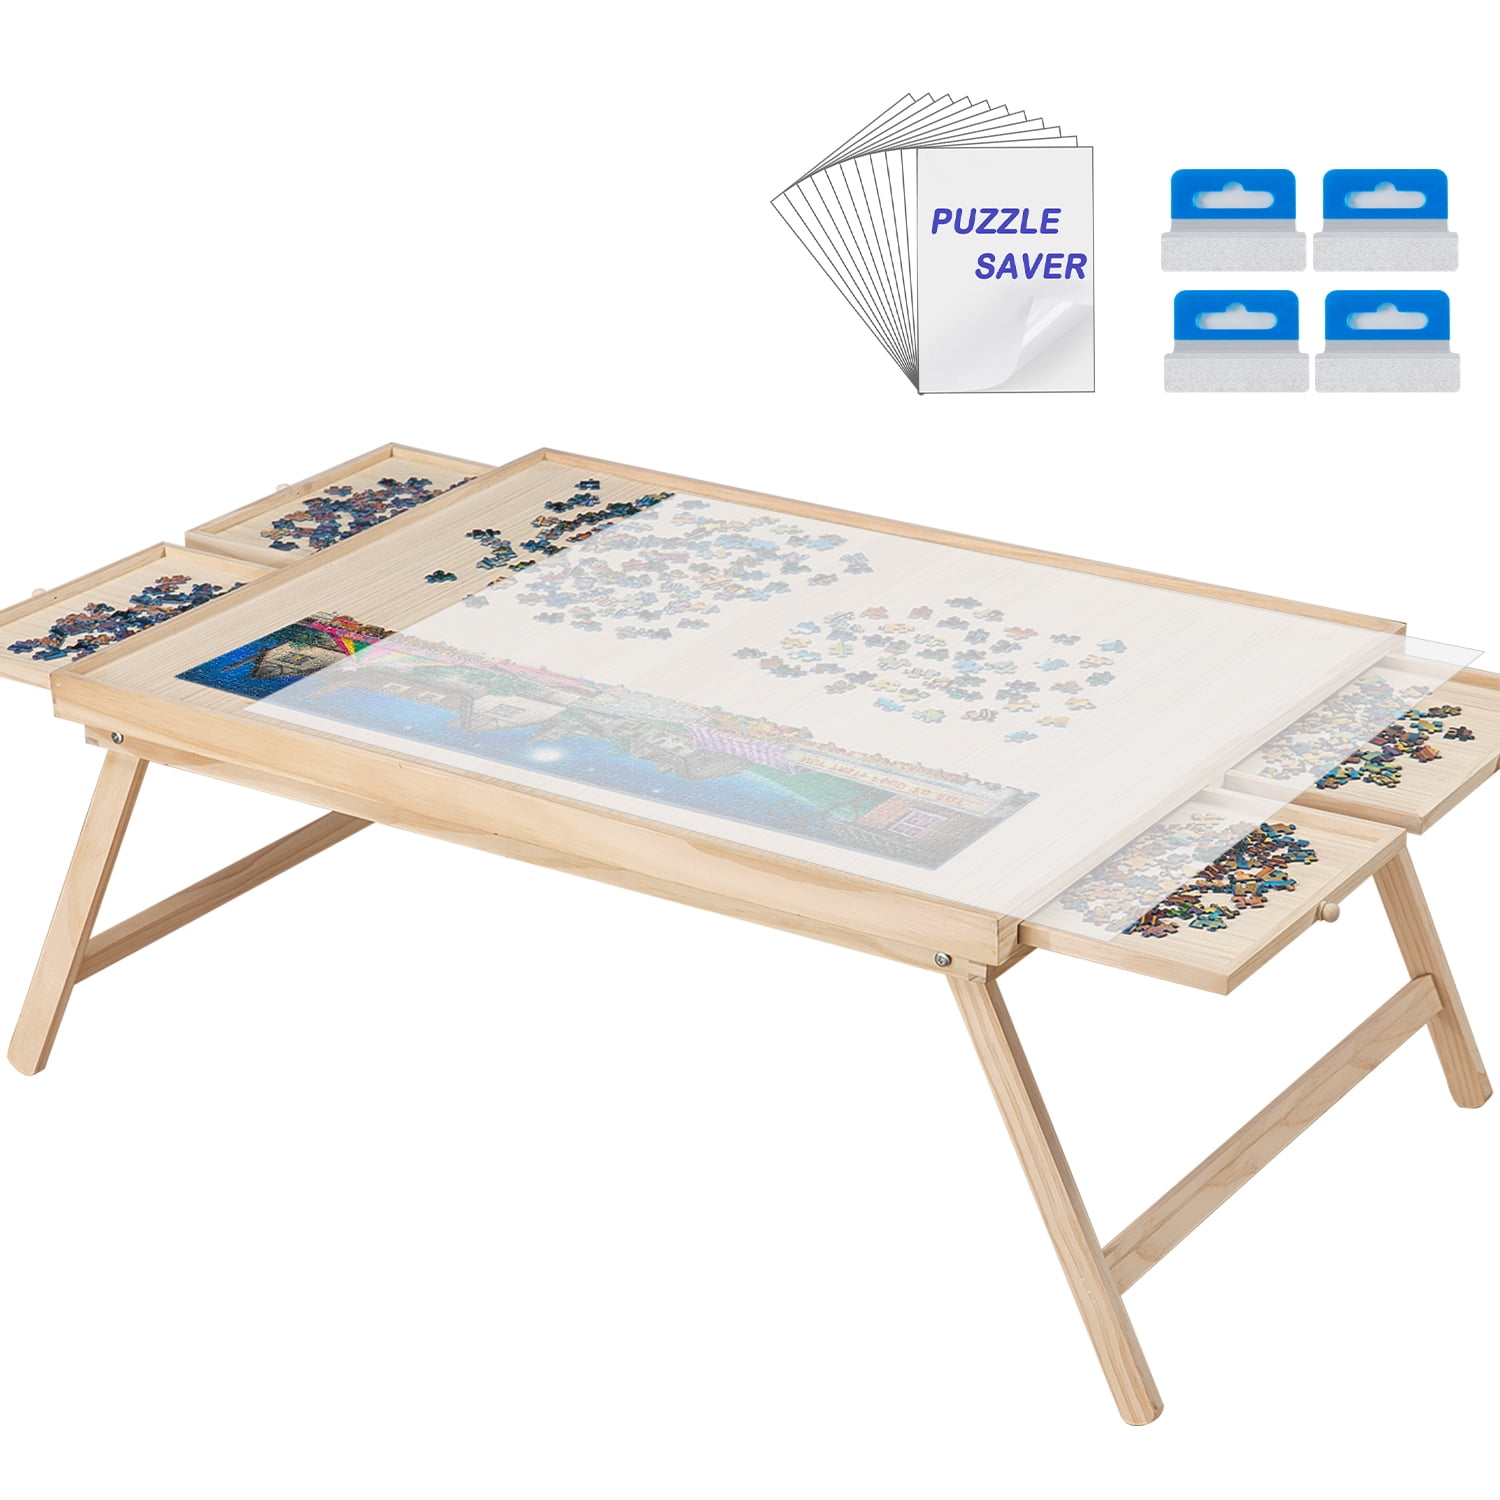 1500 Pcs Wooden Folding Puzzle Table with Legs, 34 x 26 Jigsaw Wooden Puzzle  Board with 4 Sliding Drawers and Puzzle Cover Jigsaw Puzzle Table for  Adults Birthday Gift for Family 